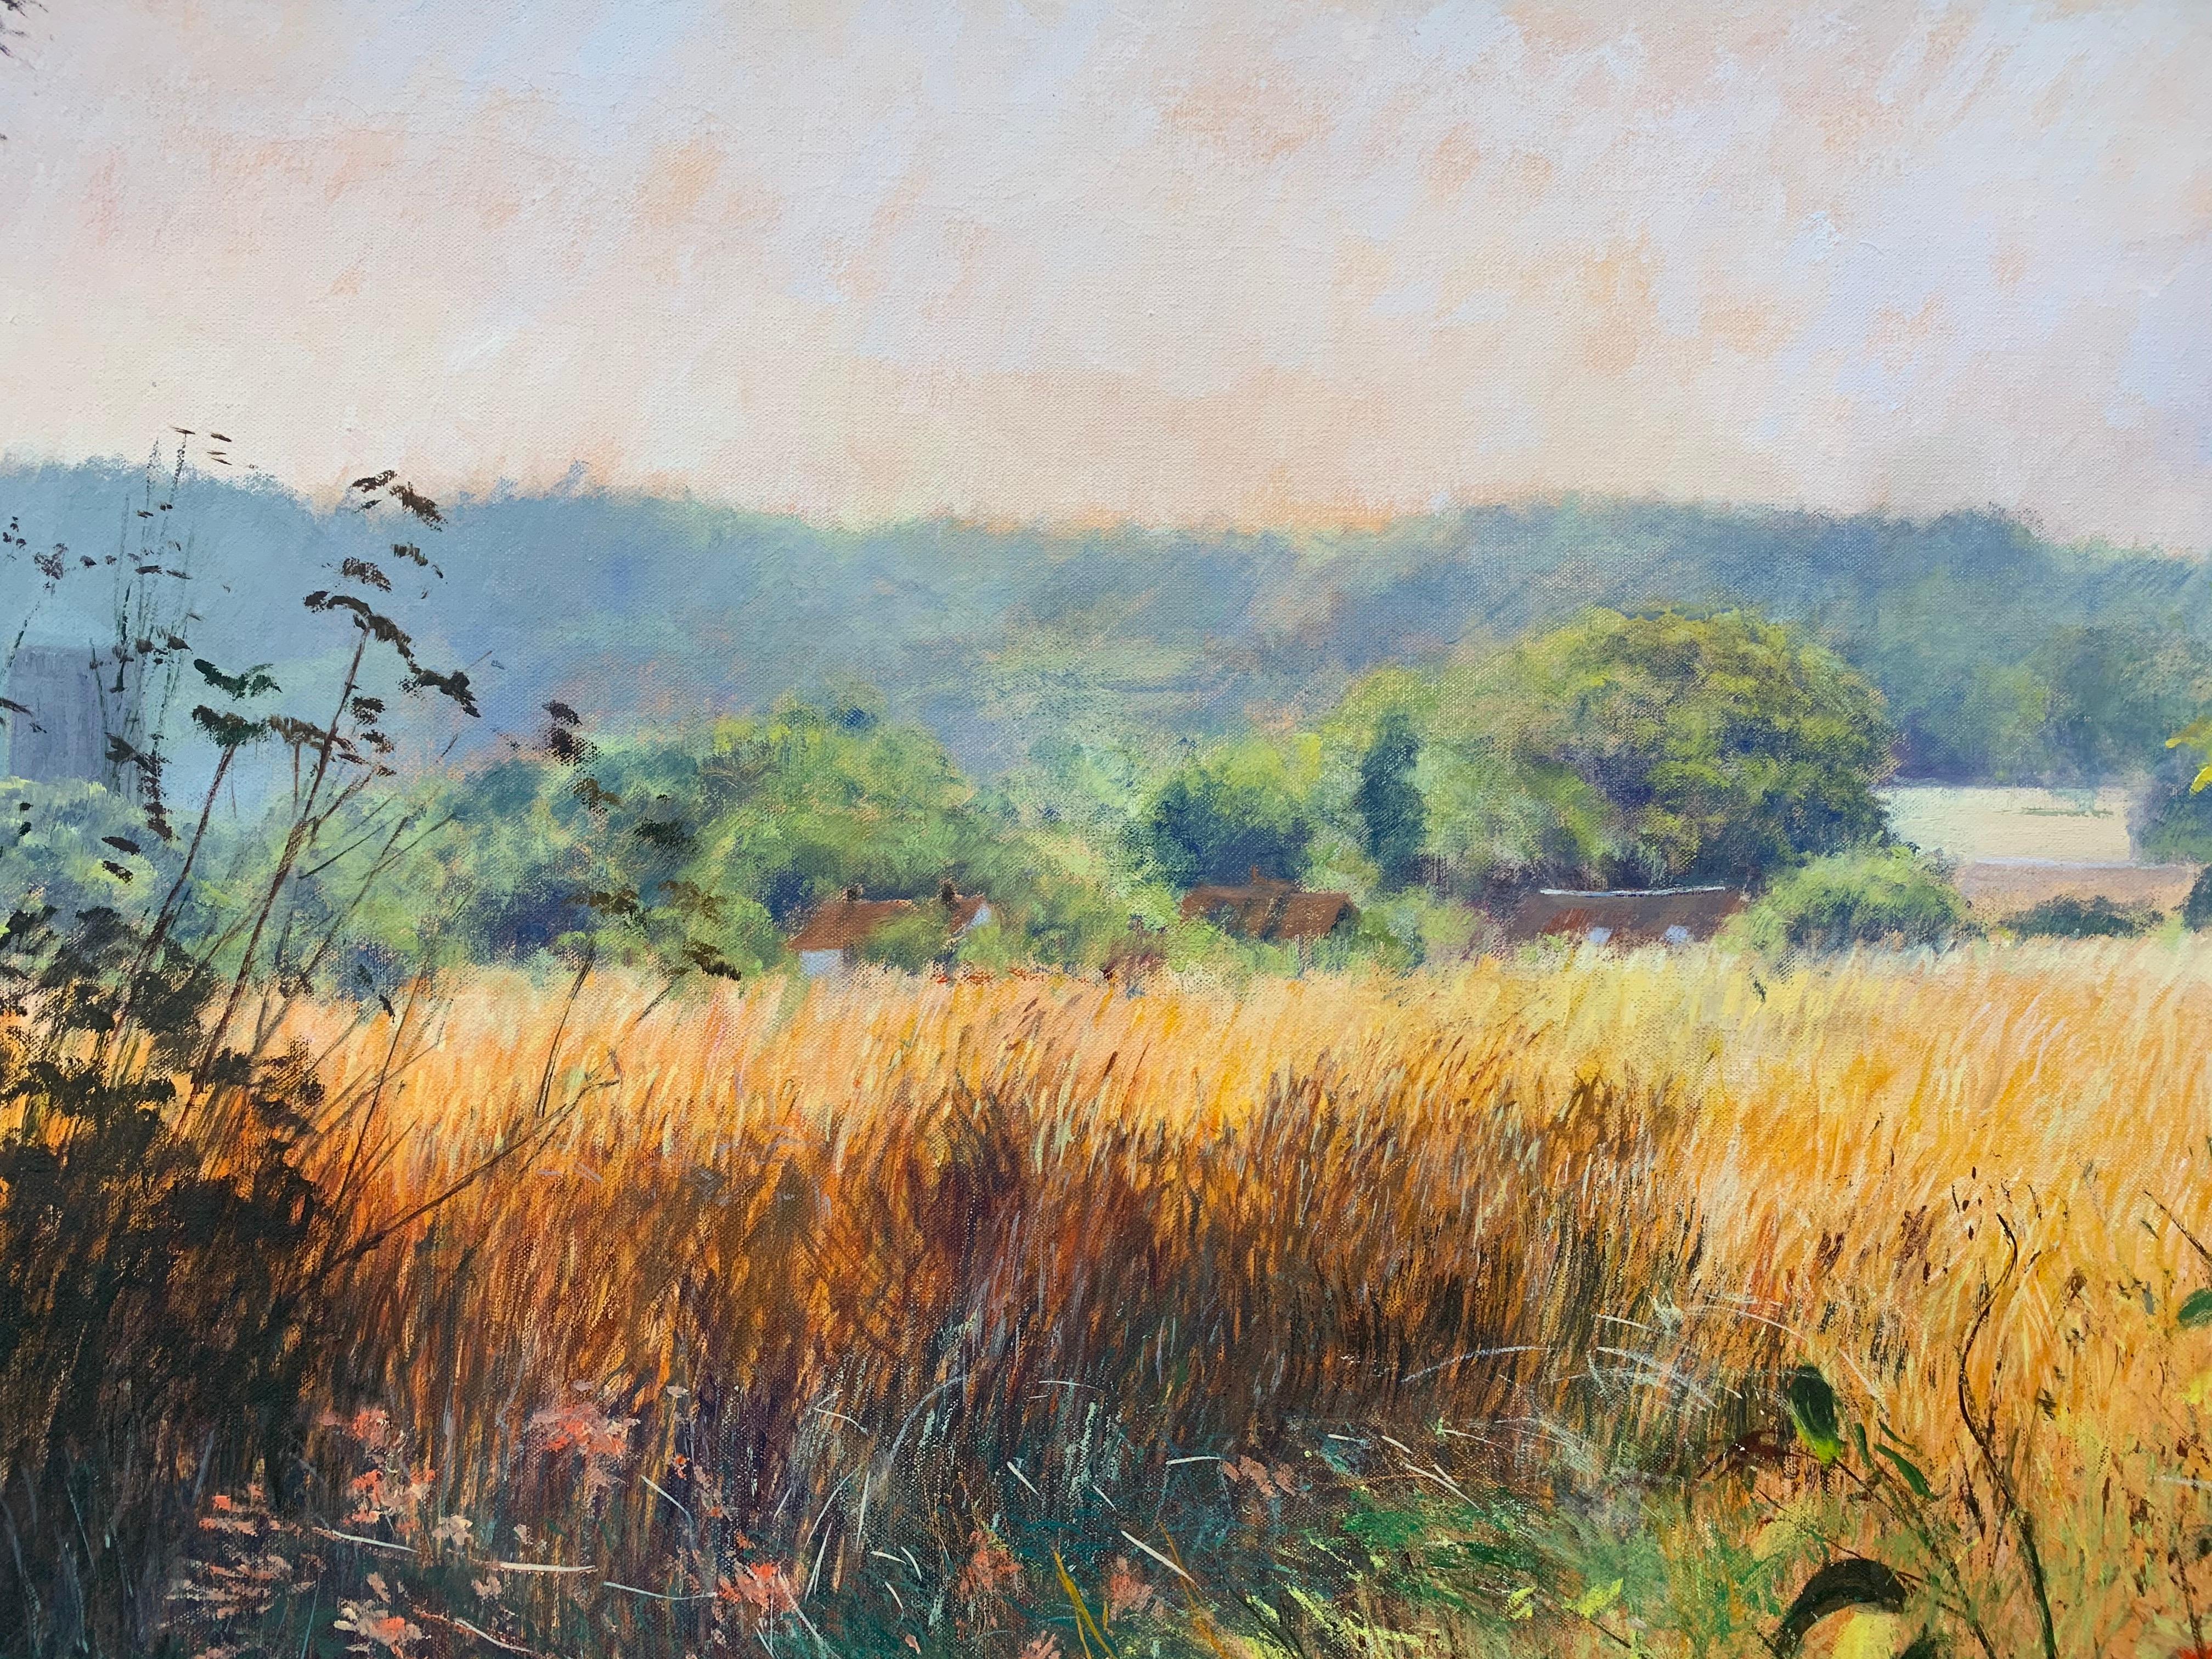 English Summer Norfolk Rural Landscape an Original Oil Painting by Artist Graham Painter (British 20th Century, 1947-2007).
Norfolk Landscape, Oil on Canvas, framed in a large high quality gold moulding.

Art measures 34 x 30 inches
Frame measures